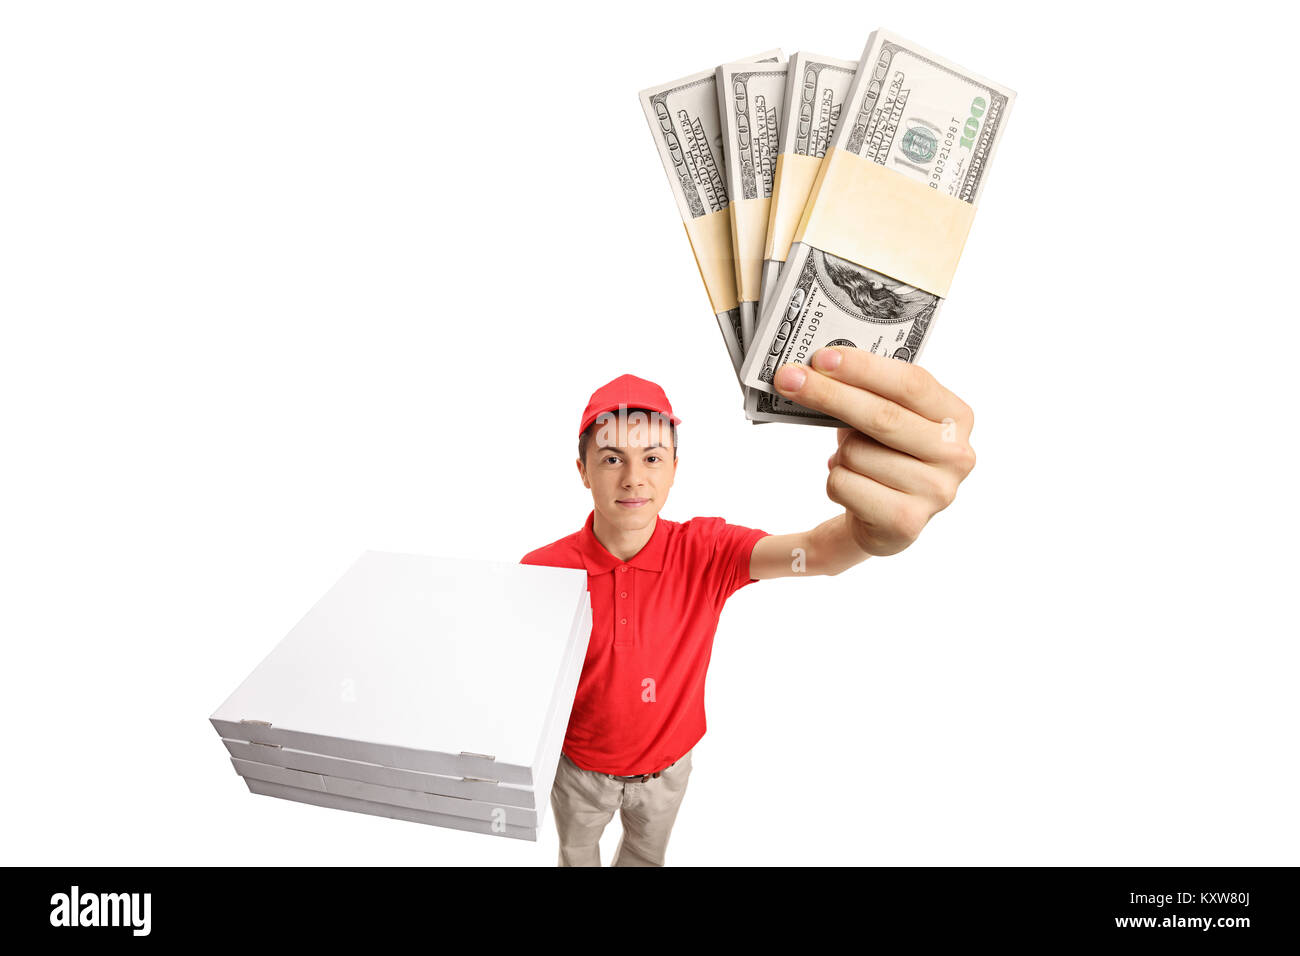 Teenage pizza delivery boy with bundles of money isolated on white background Stock Photo